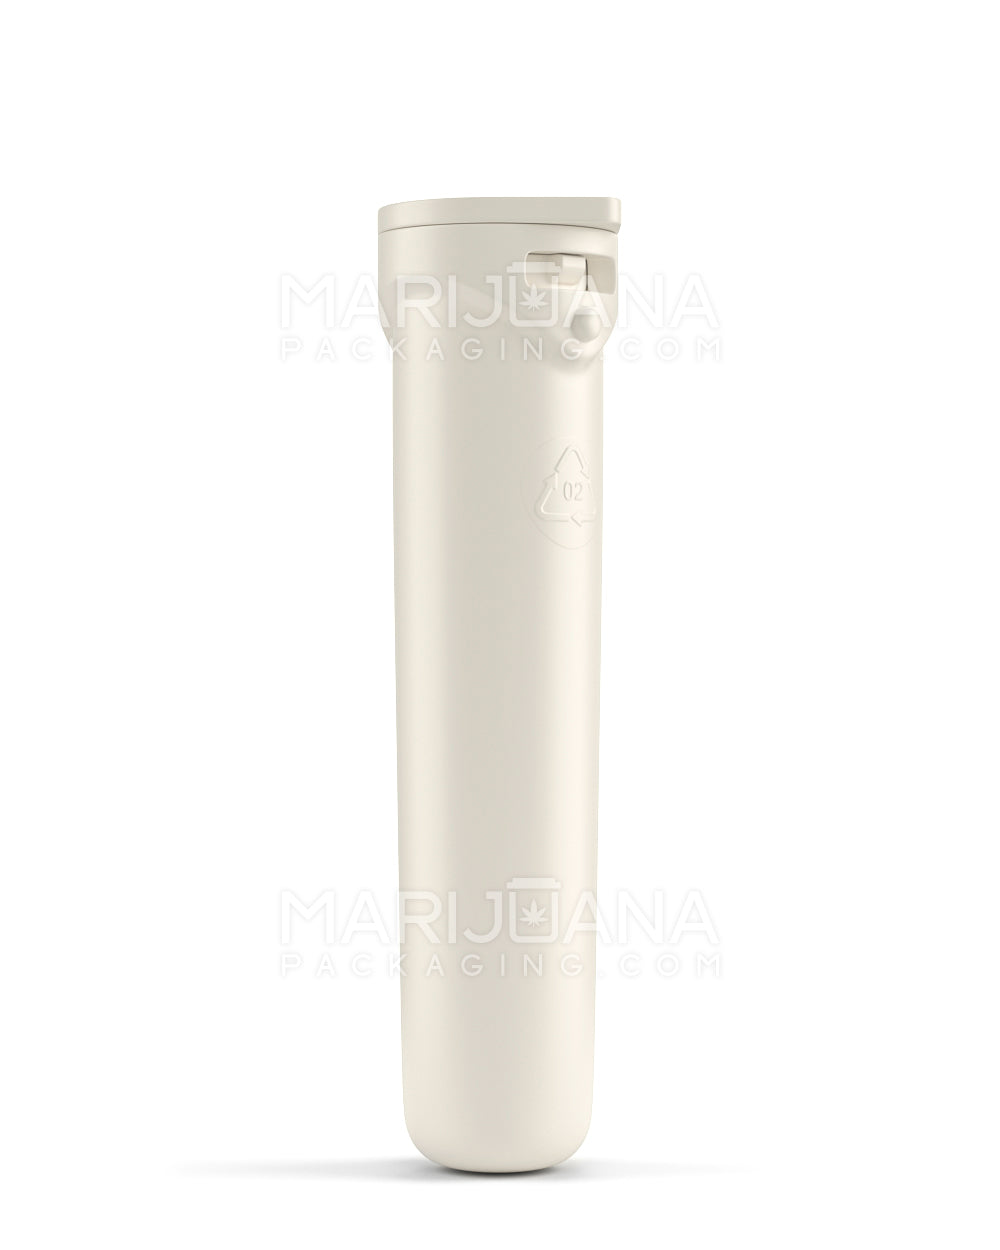 Child Resistant & Sustainable Recyclable "Line-up Arrow" Reclaimed Ocean Plastic Pre-Roll Tubes | 78mm - Beige | Sample - 1